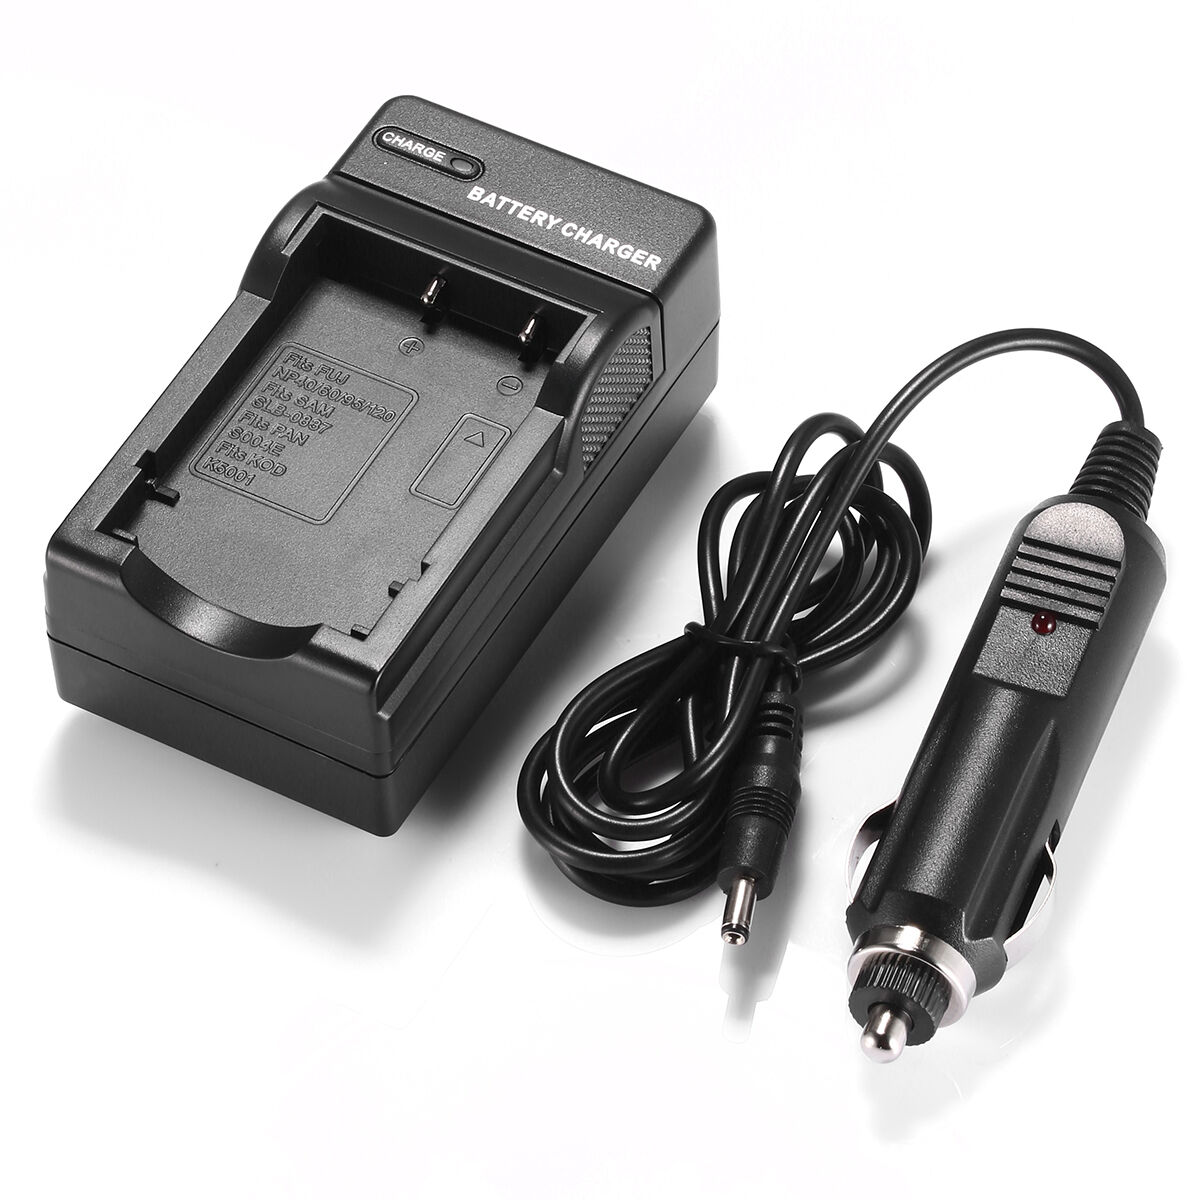 CASIO Exilim Zoom EX-Z85GN battery charger